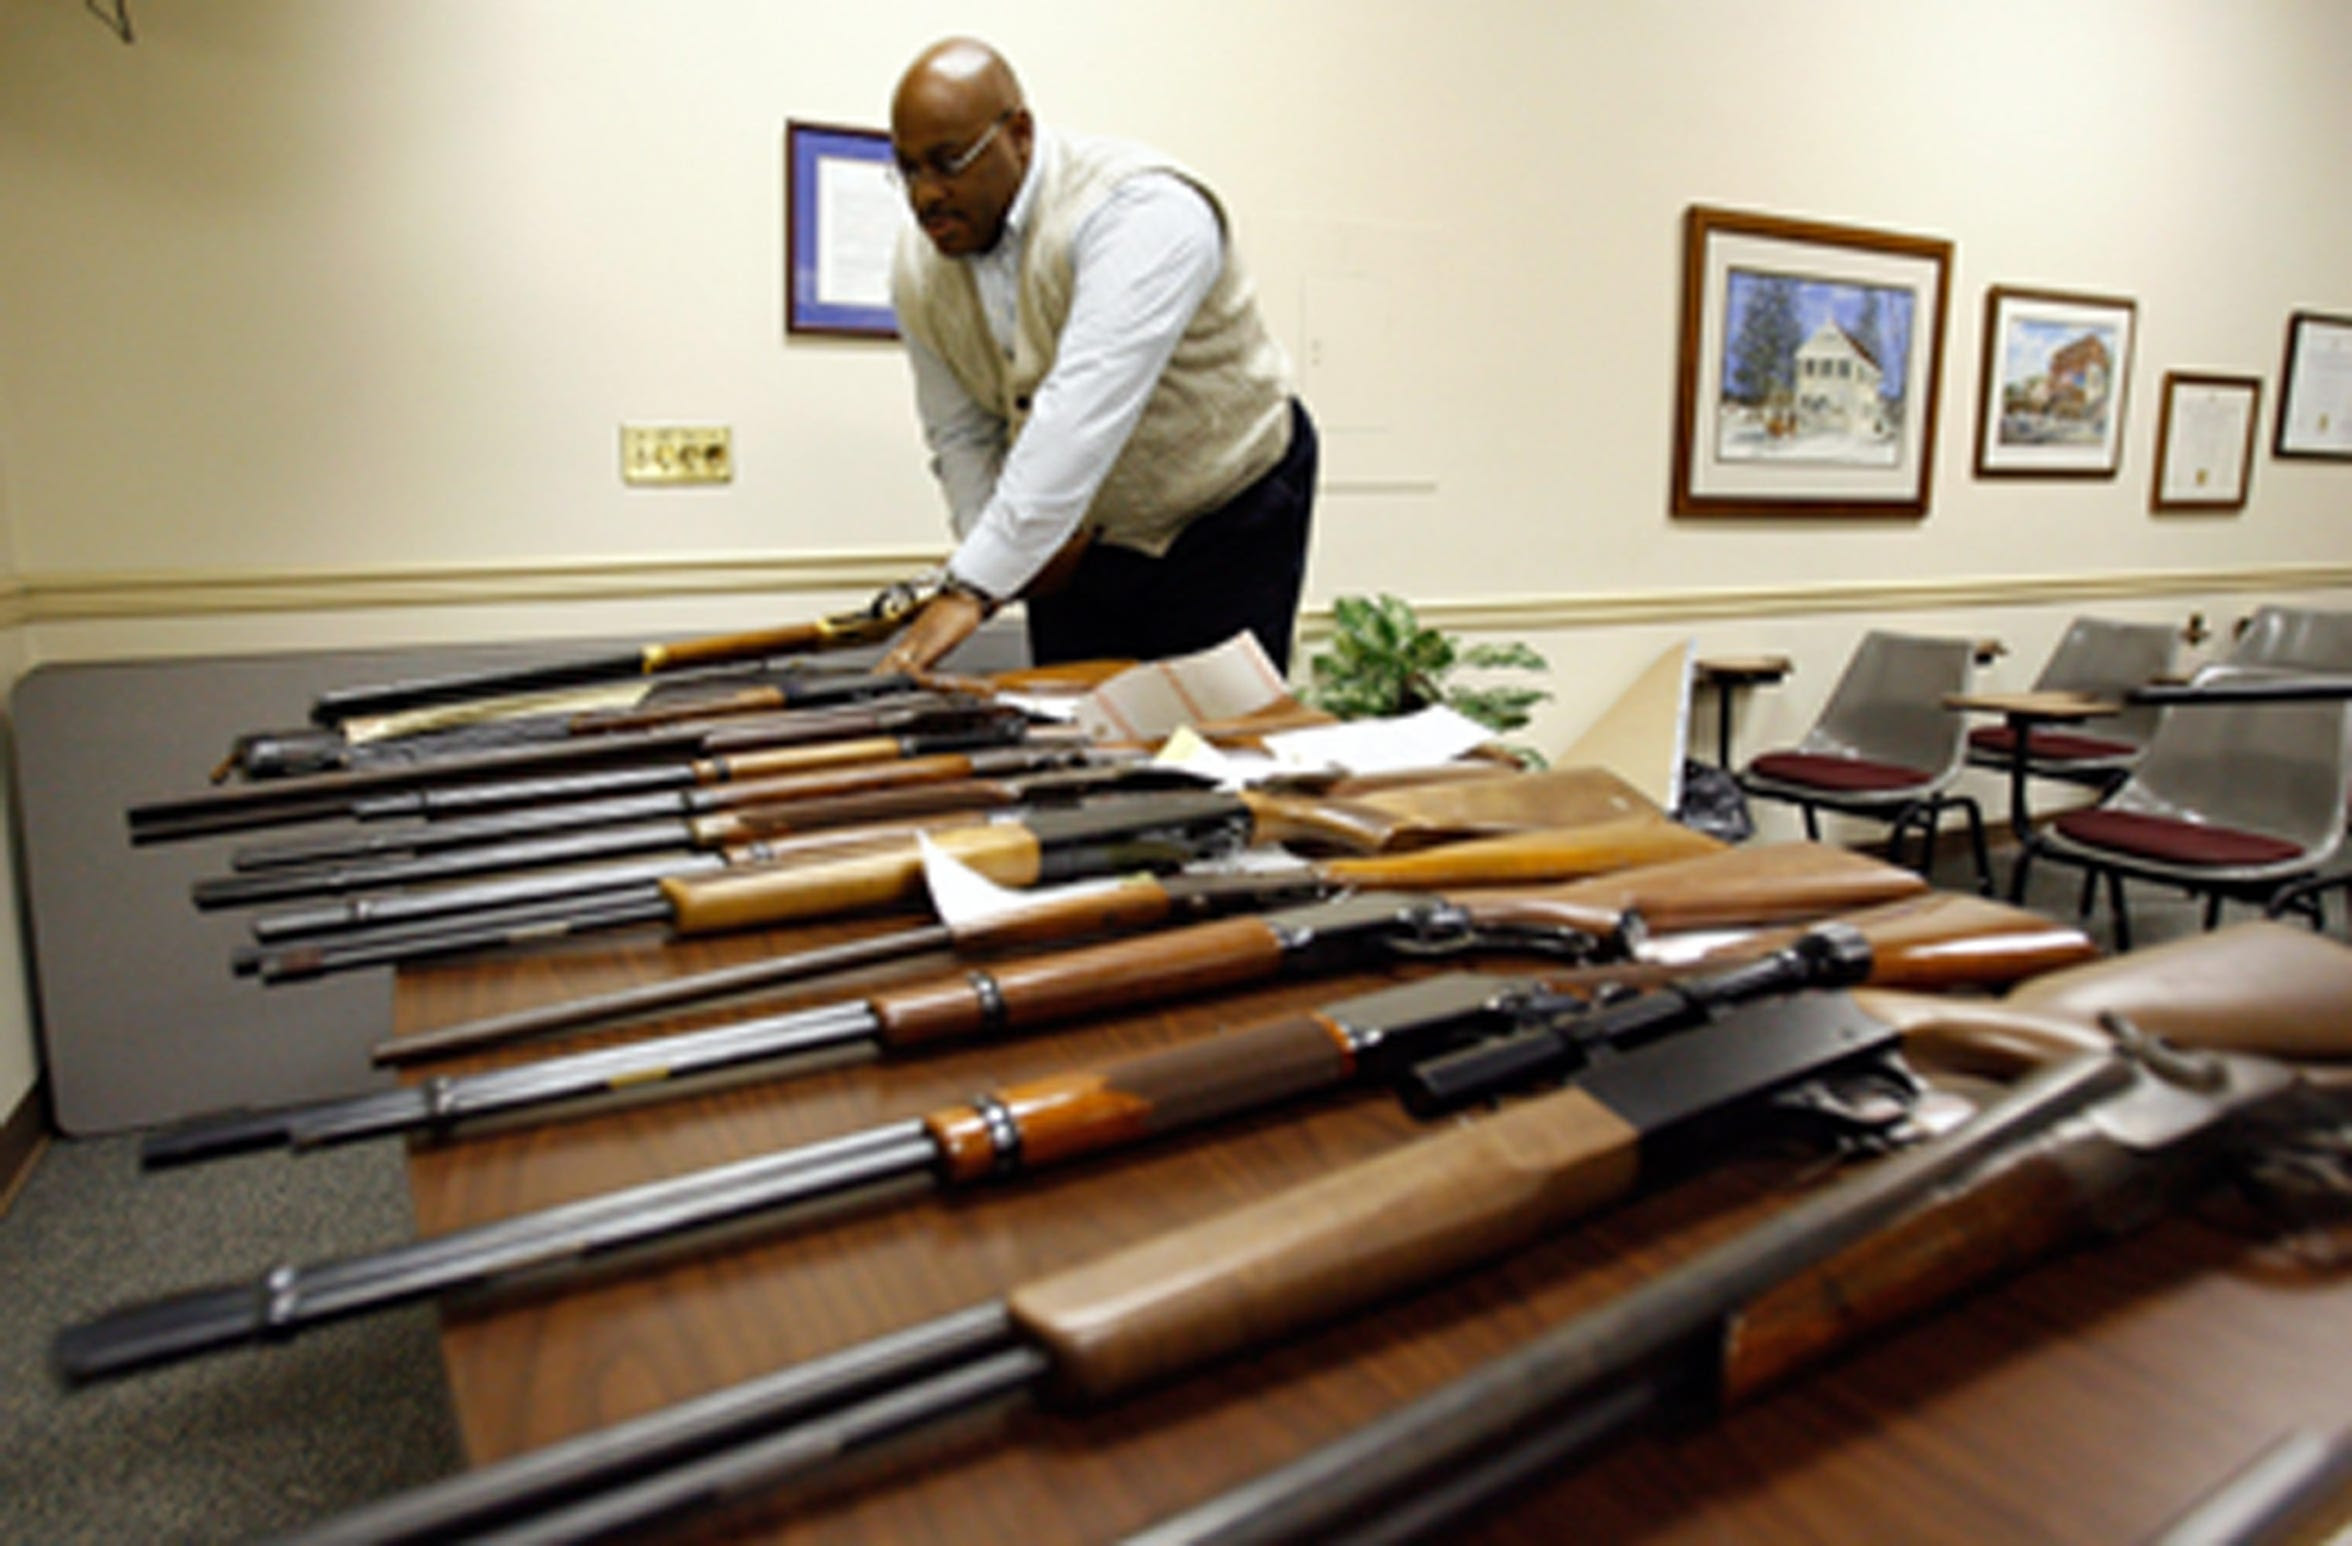 In this photo from The News Journal archives, Quinton Watson, then-commander of Safe Streets and a captain within the department, stands with weapons seized from a man who was charged with weapons and drug offenses as well as violating a Protection from Abuse Order. Watson touched nearly every unit within the department during his career.